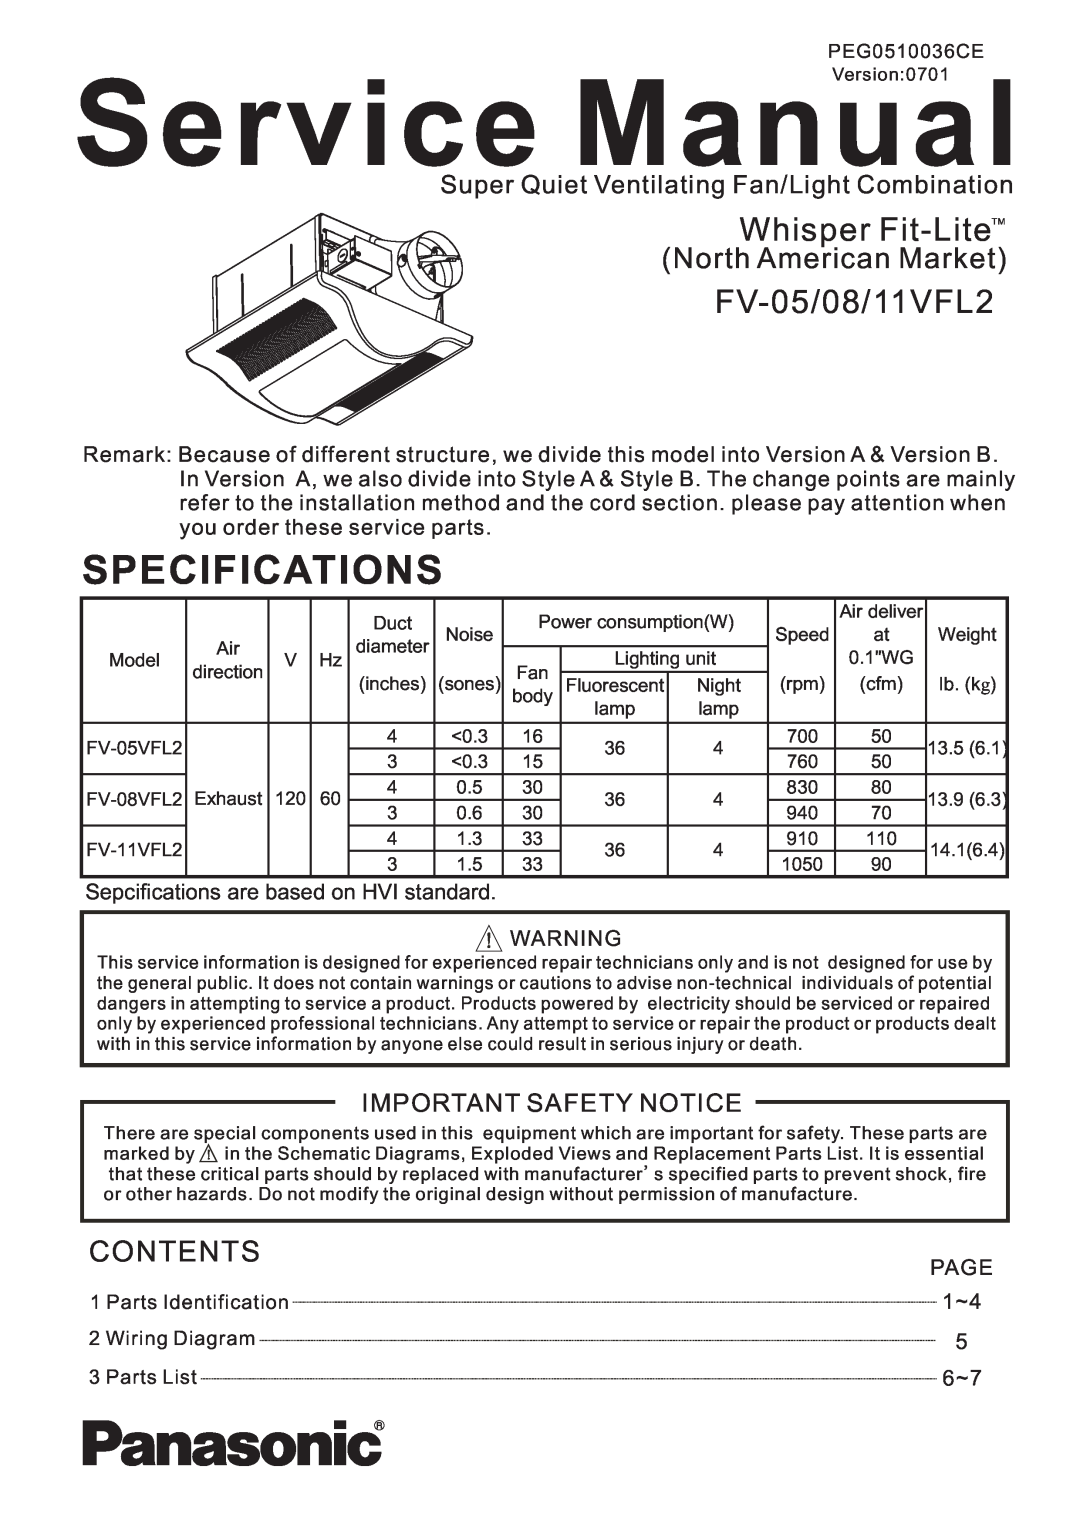 Panasonic FV-05/08/11VFL2 service manual Whisper Fit-LiteTM, North American Market, Contents, Specifications 